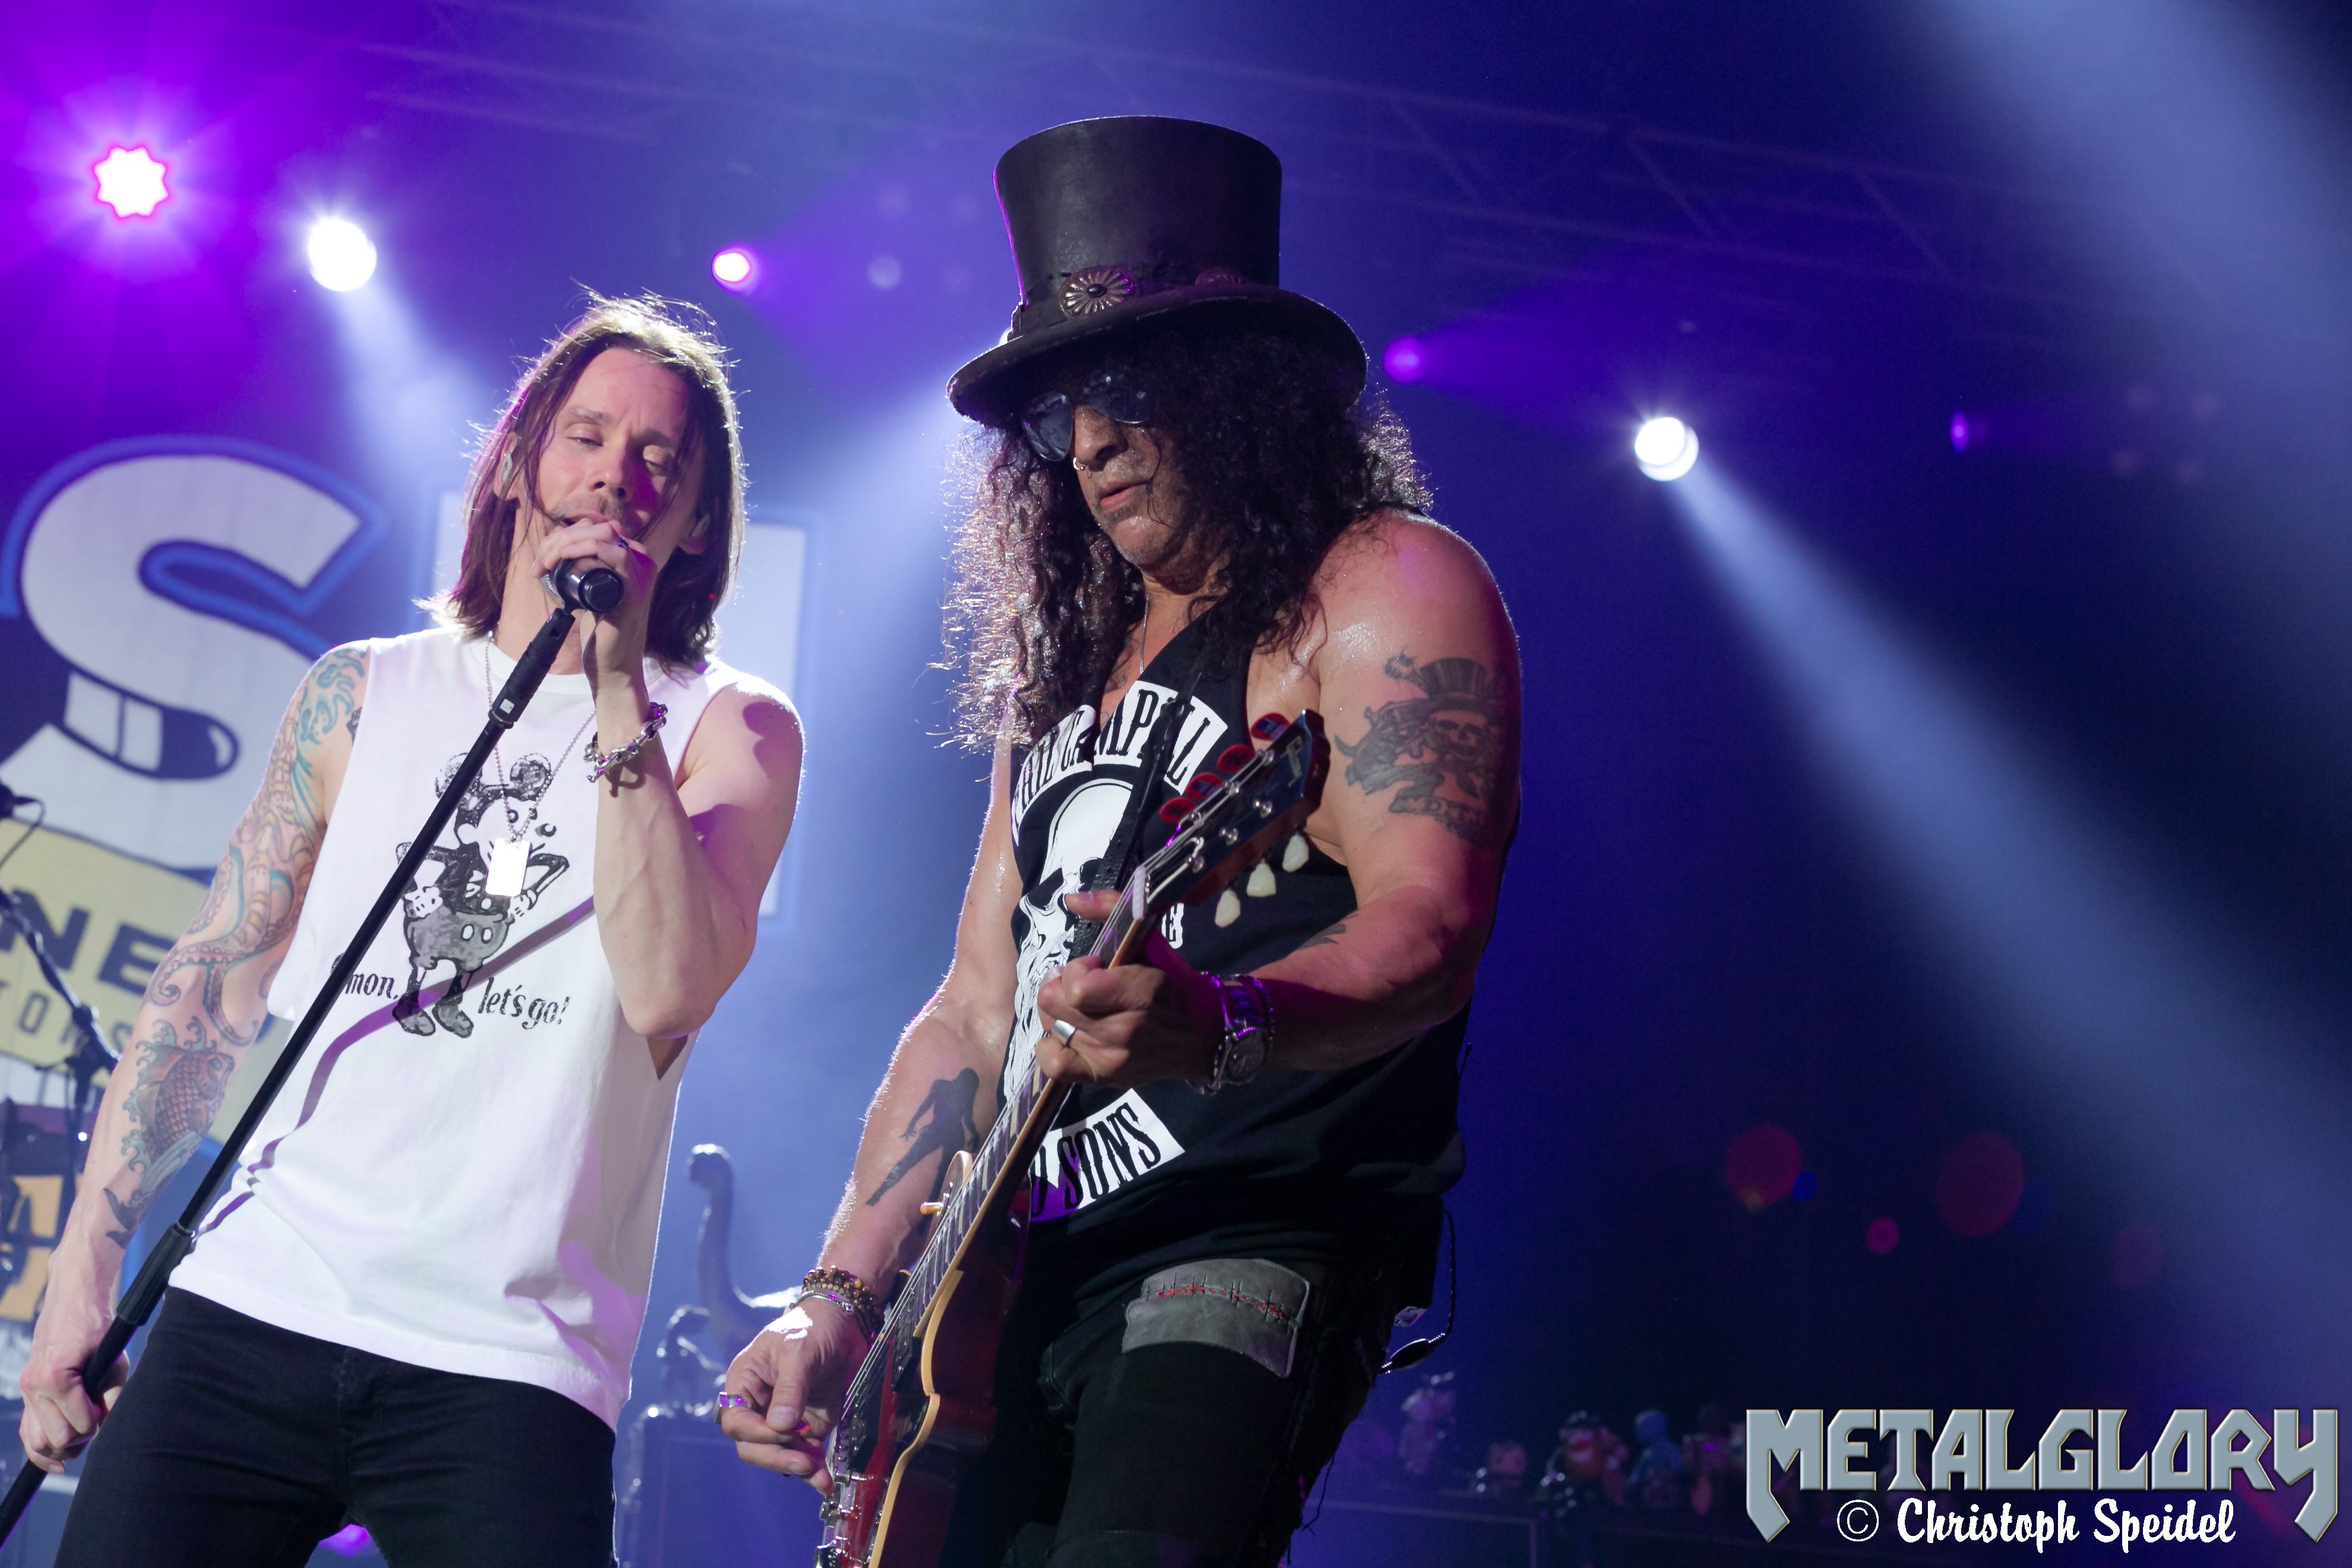 Slash Feat. Myles Kennedy & The Conspirators „Livin The Dream Tour 2019“, Support The Virginmarys, 19.06.2019, Swiss Life Hall, Hannover